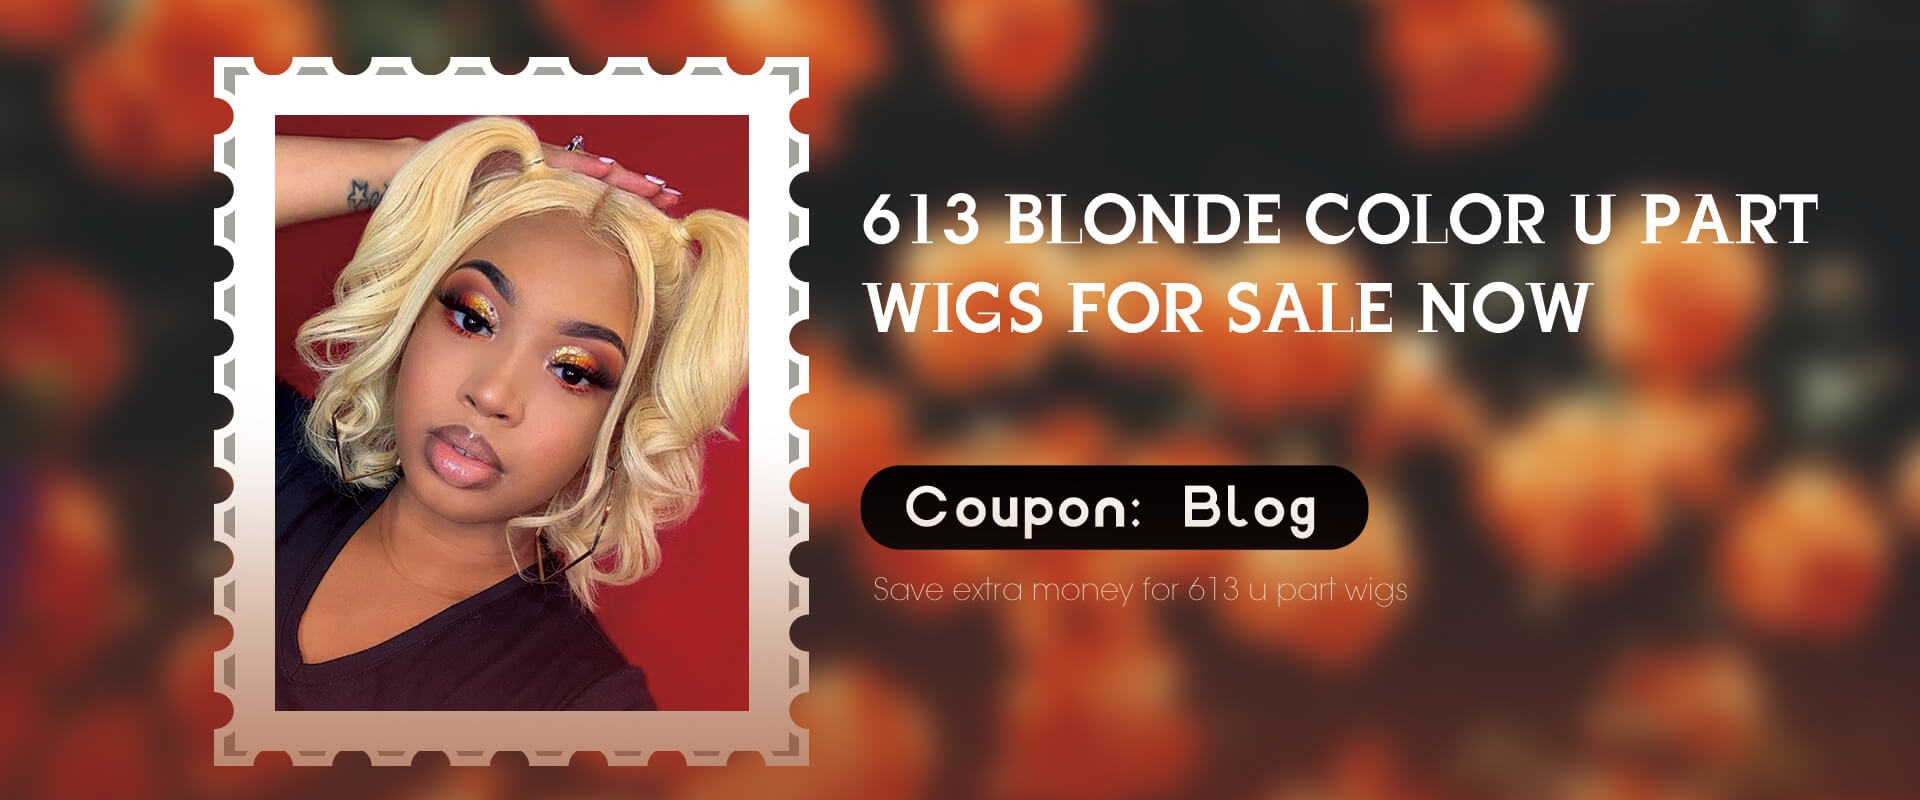 613 blonde u part hair wigs for sale now